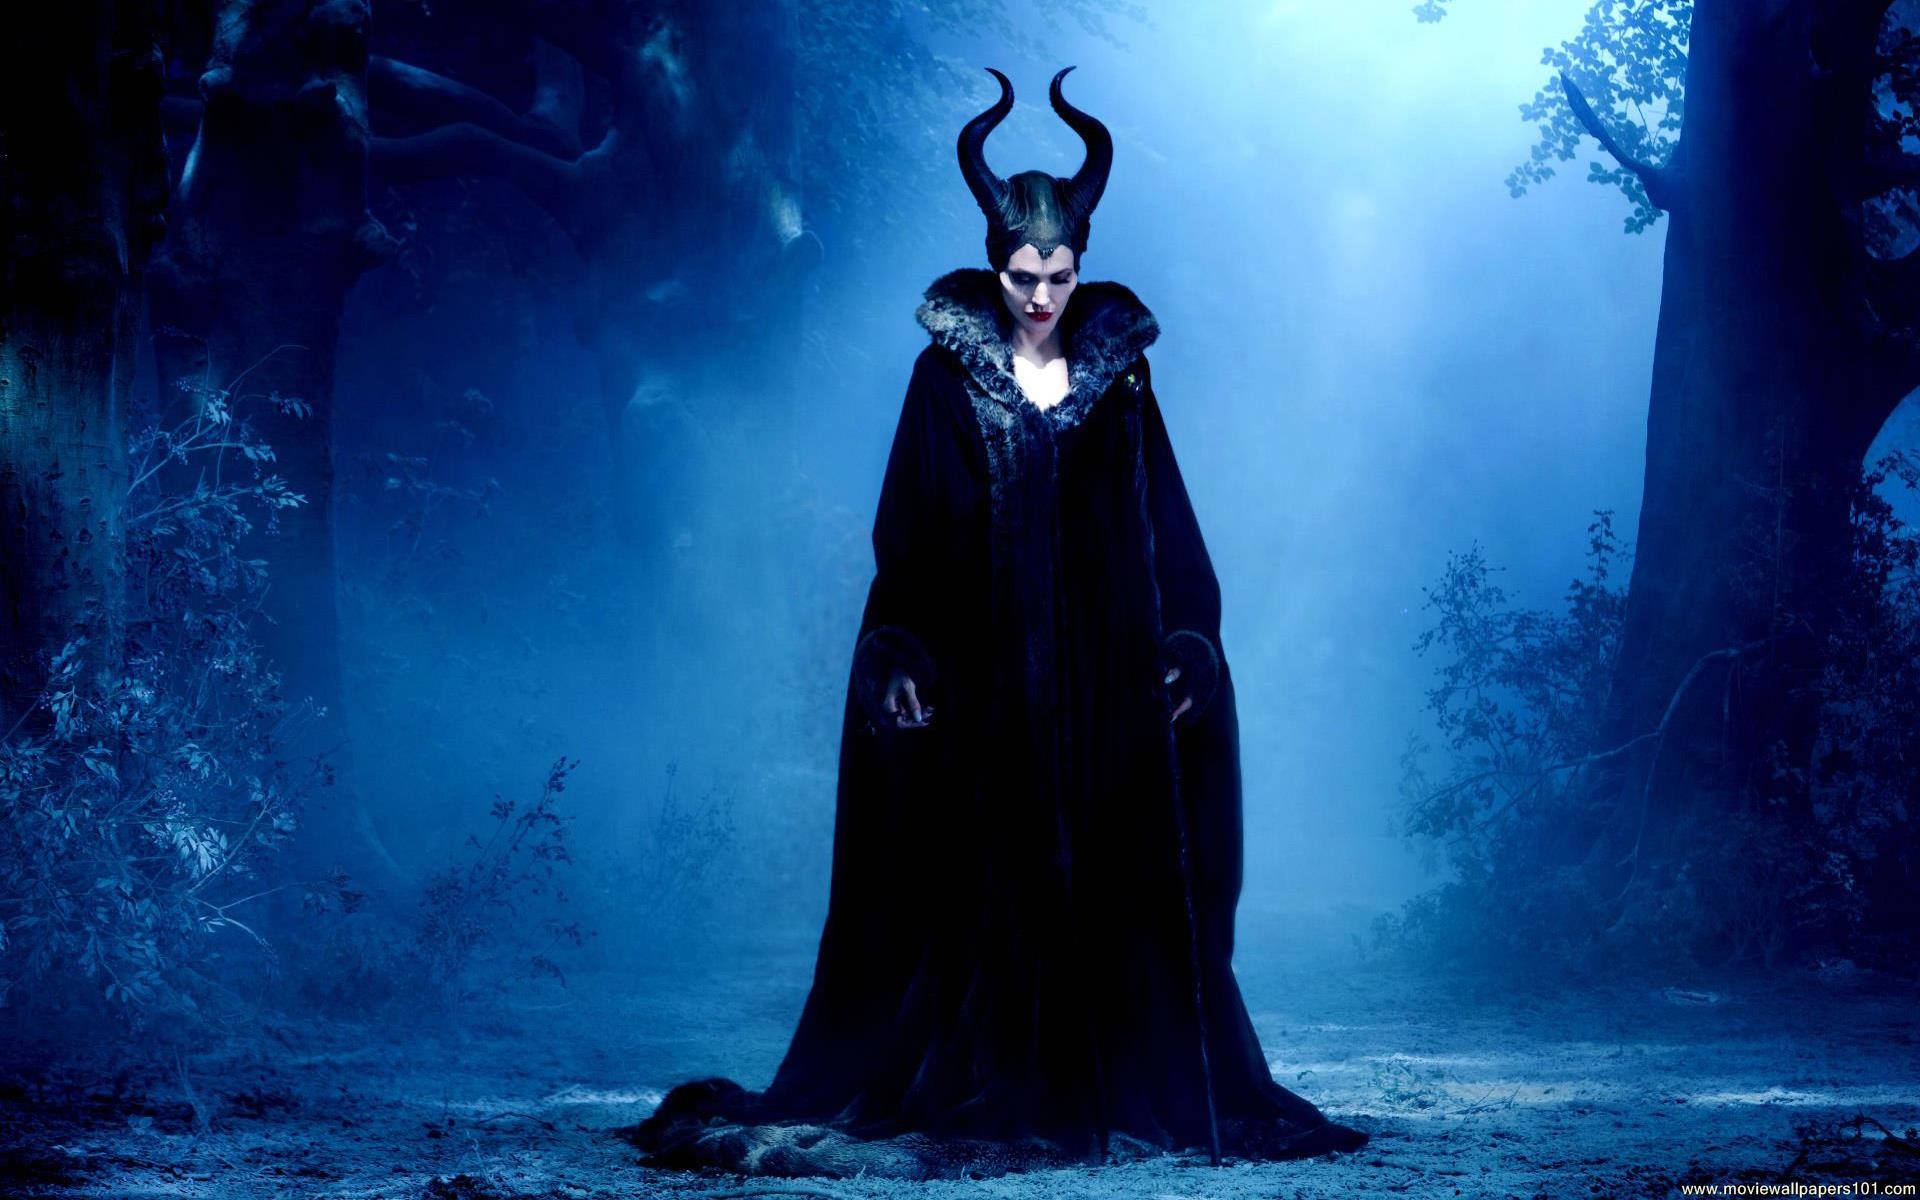 1920x1200 Wallpapers; search results for 'Maleficent'